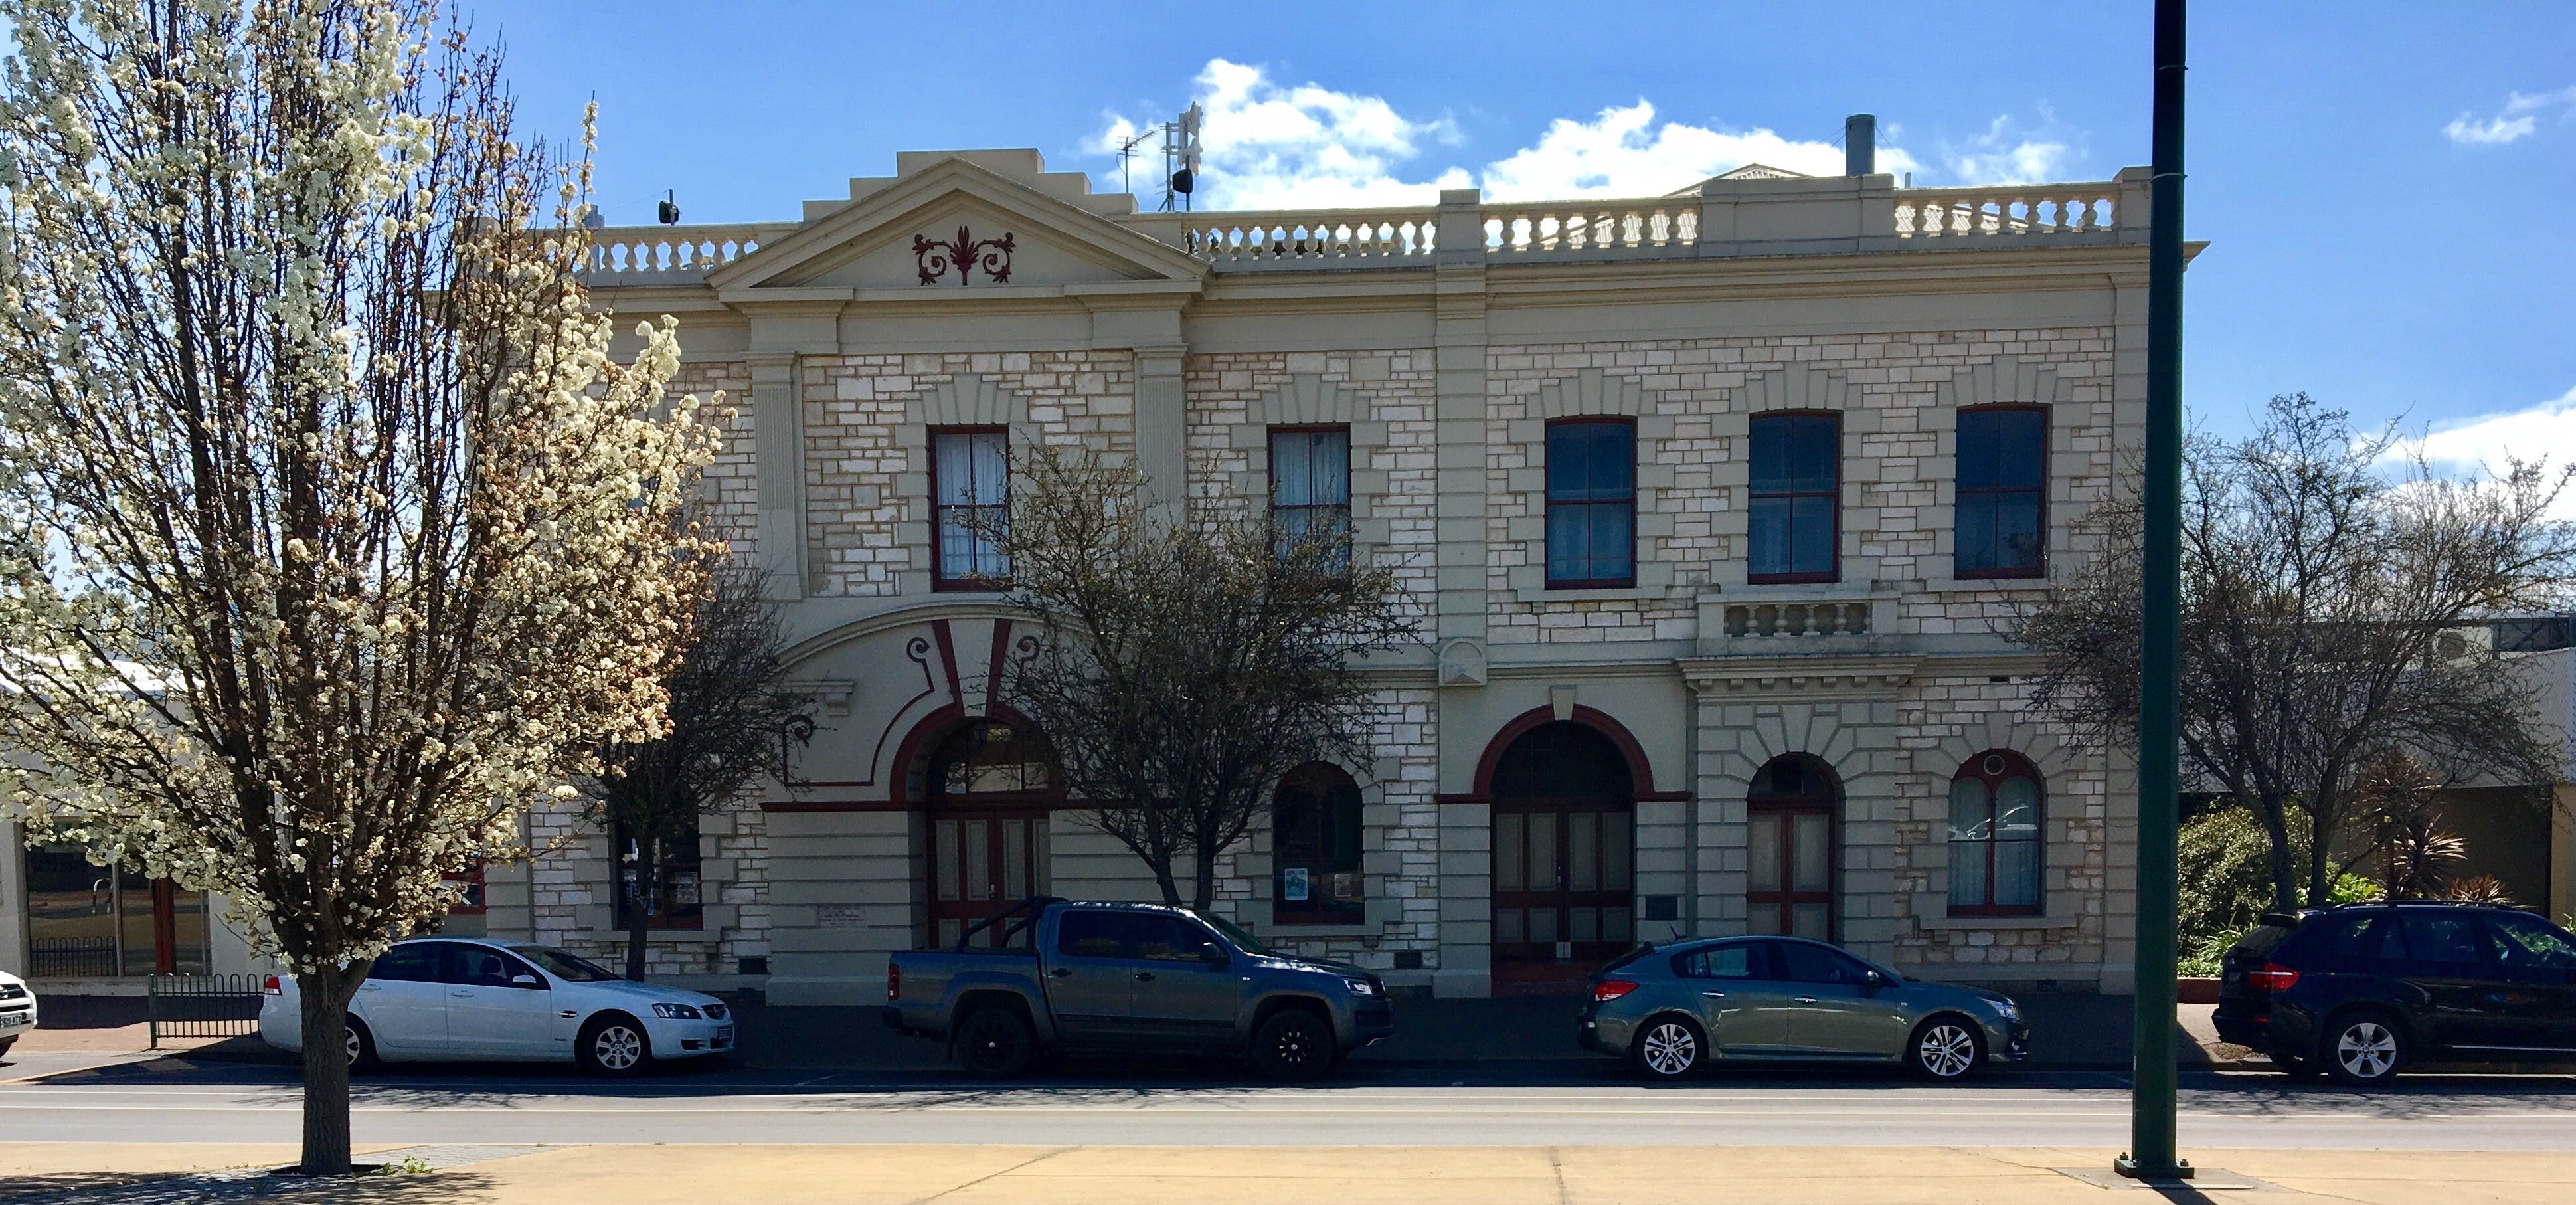 Naracoorte Town Hall - Tourism Adelaide